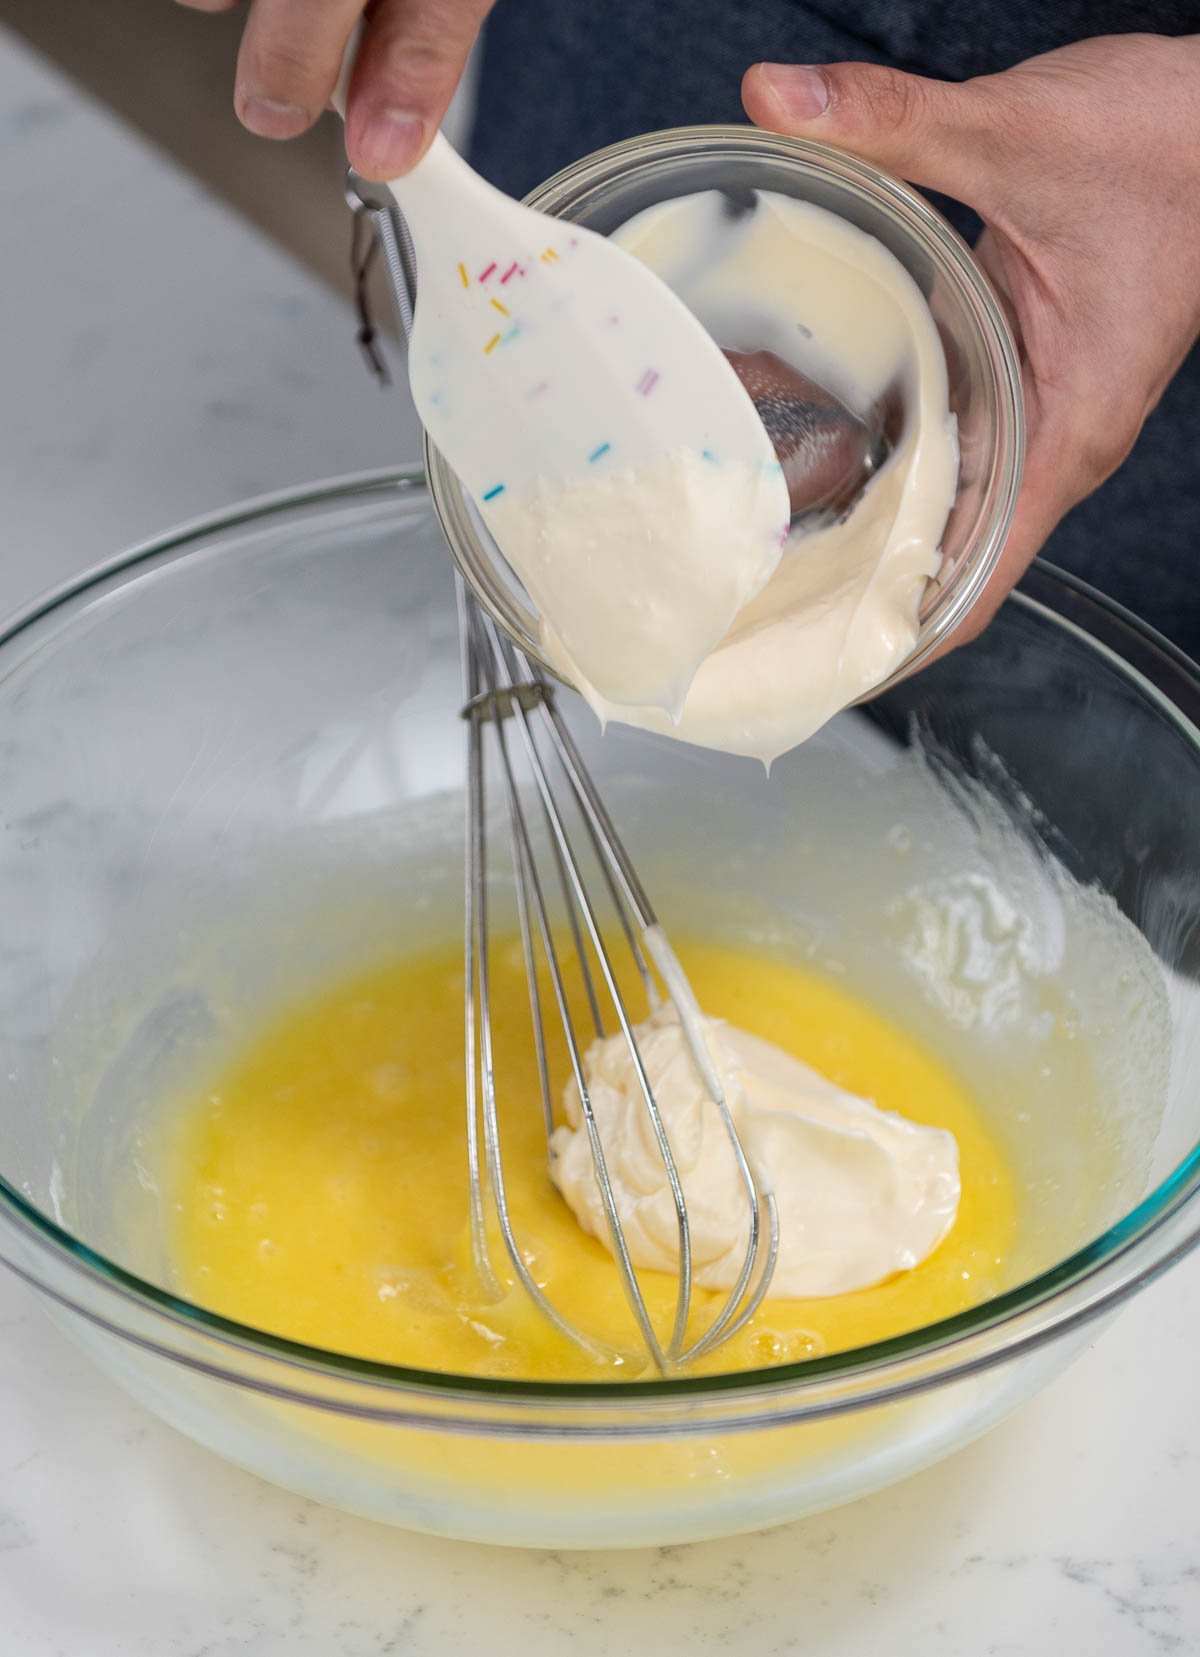 using spatula to transfer ingredient to mixing bowl